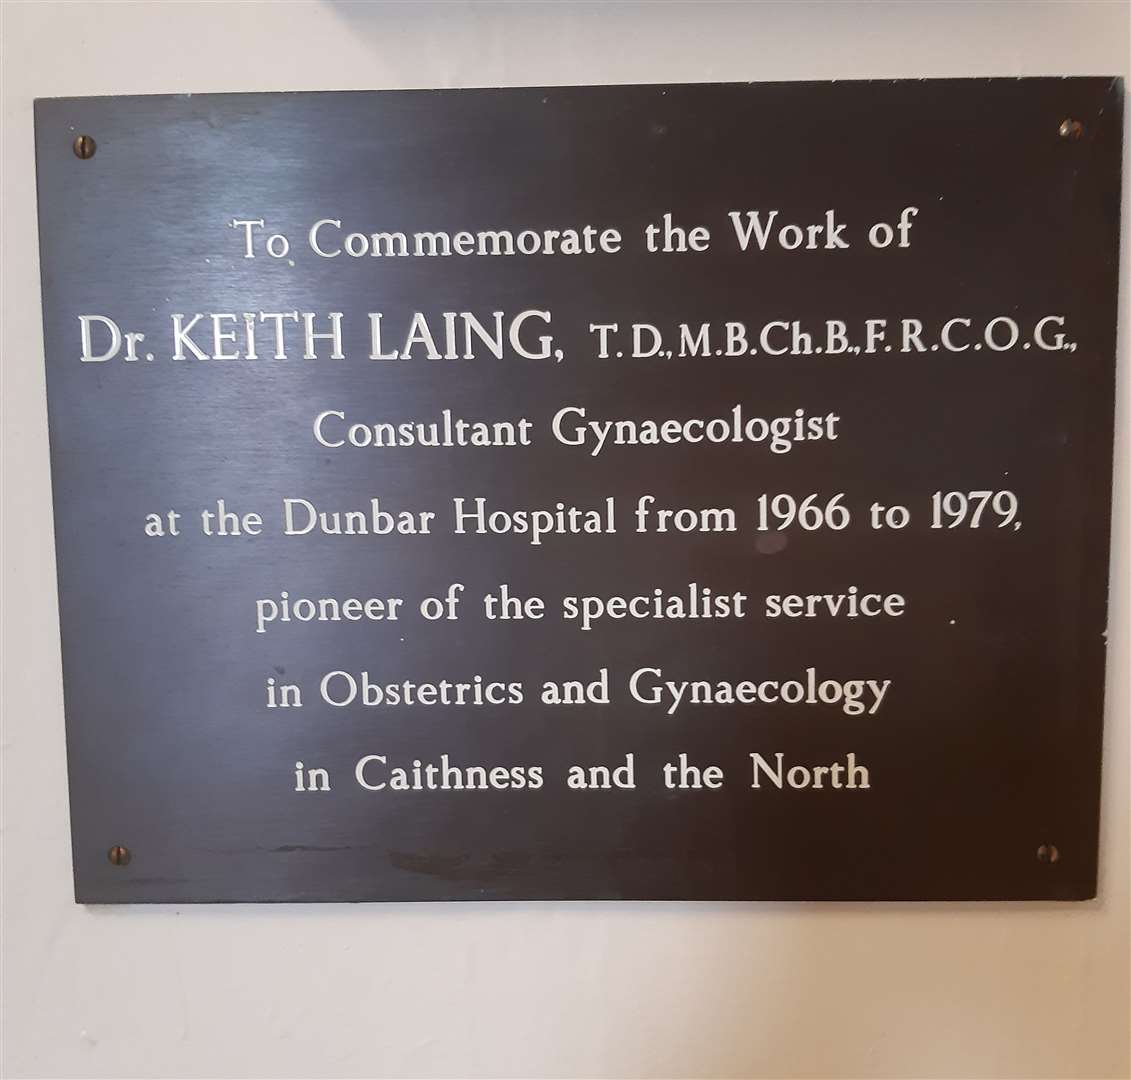 Councilor Matthew Reiss sent this photo of a Dunbar Hospital plaque to NHS Highland as 